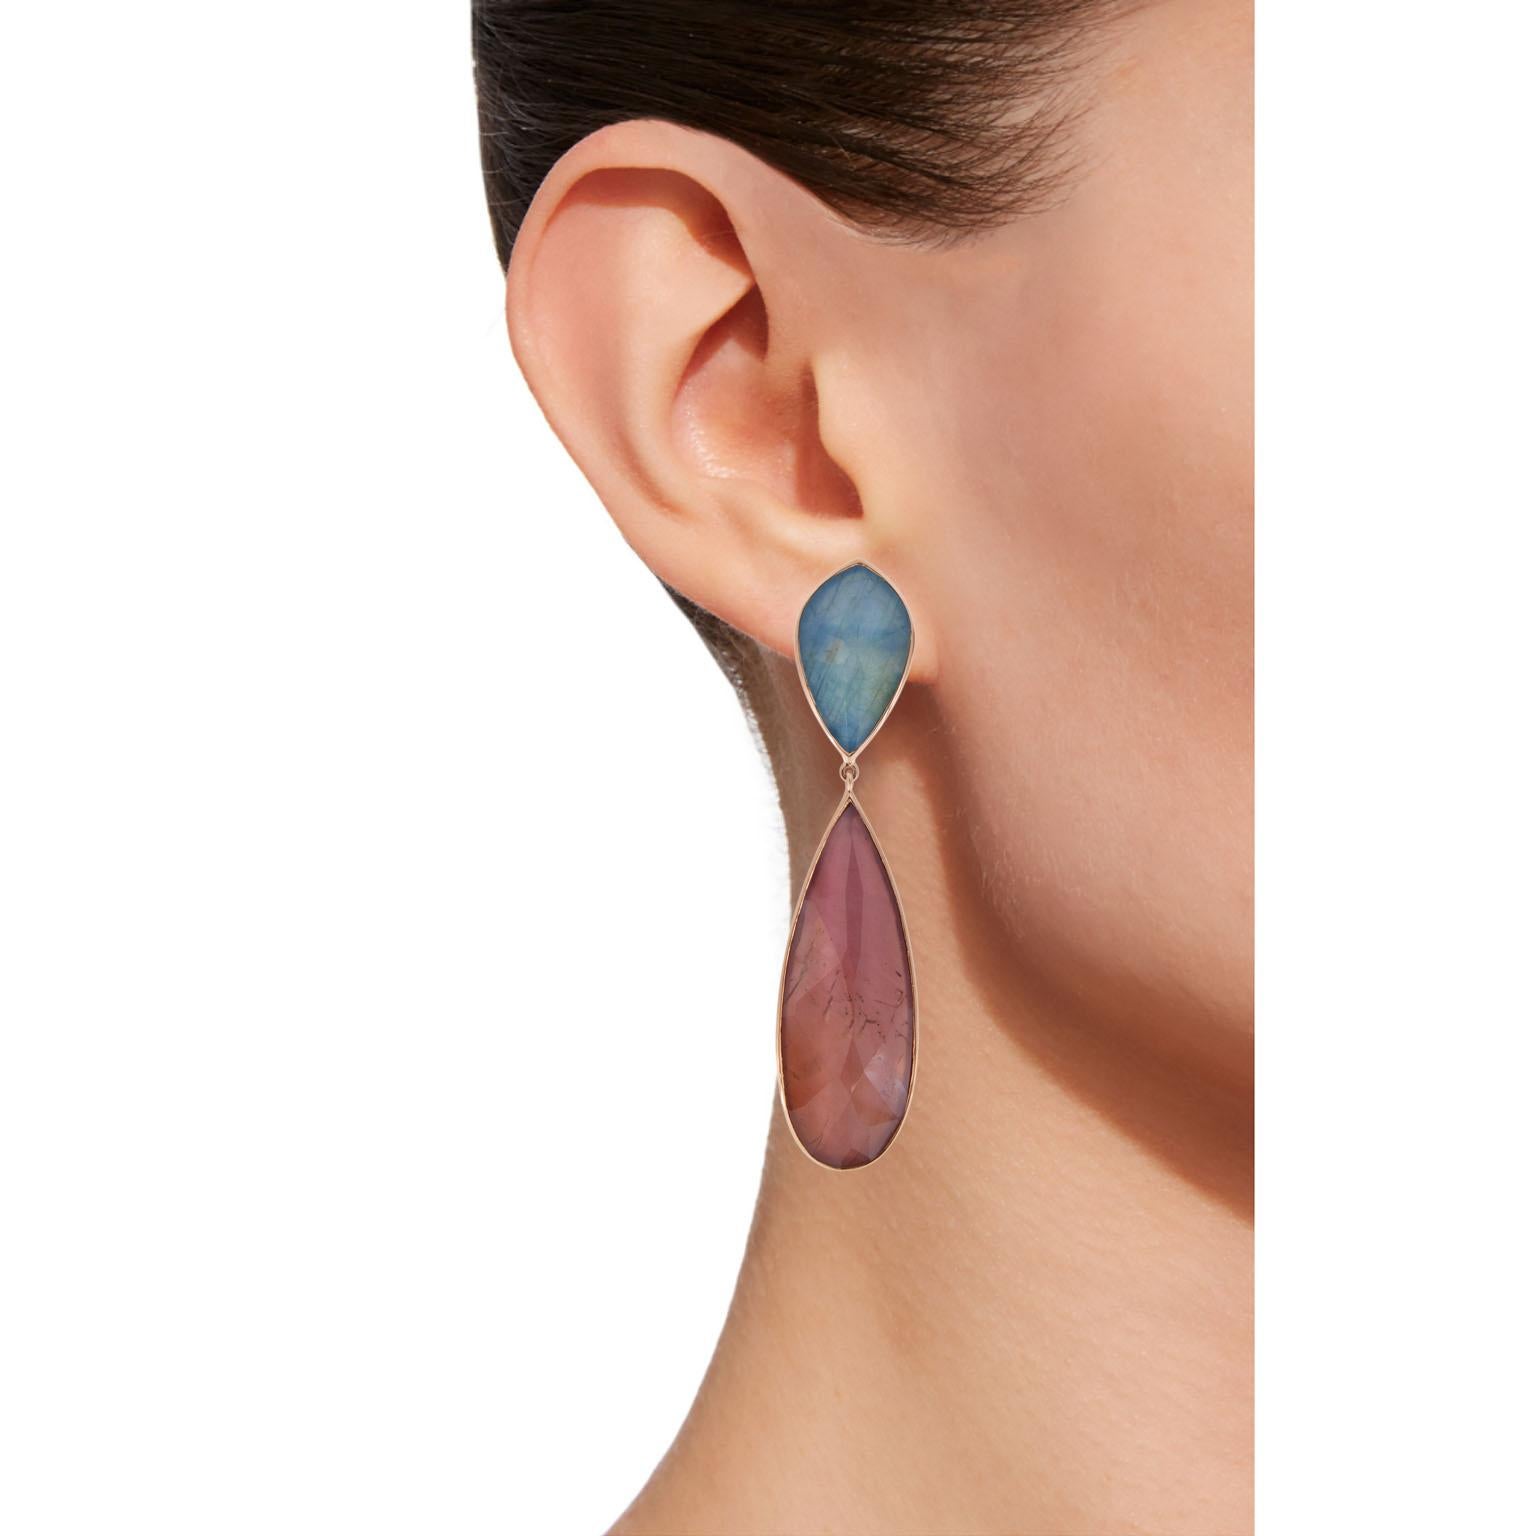 Jona design collection, hand crafted in Italy, 18 Karat rose gold drop earrings set with a crazy cut Quartz over Apatite & Quartz over Rhodolite.
Dimension : H 2.62 in x W 0.6 in - H 66 mm x W 16.31 mm
All Jona jewelry is new and has never been